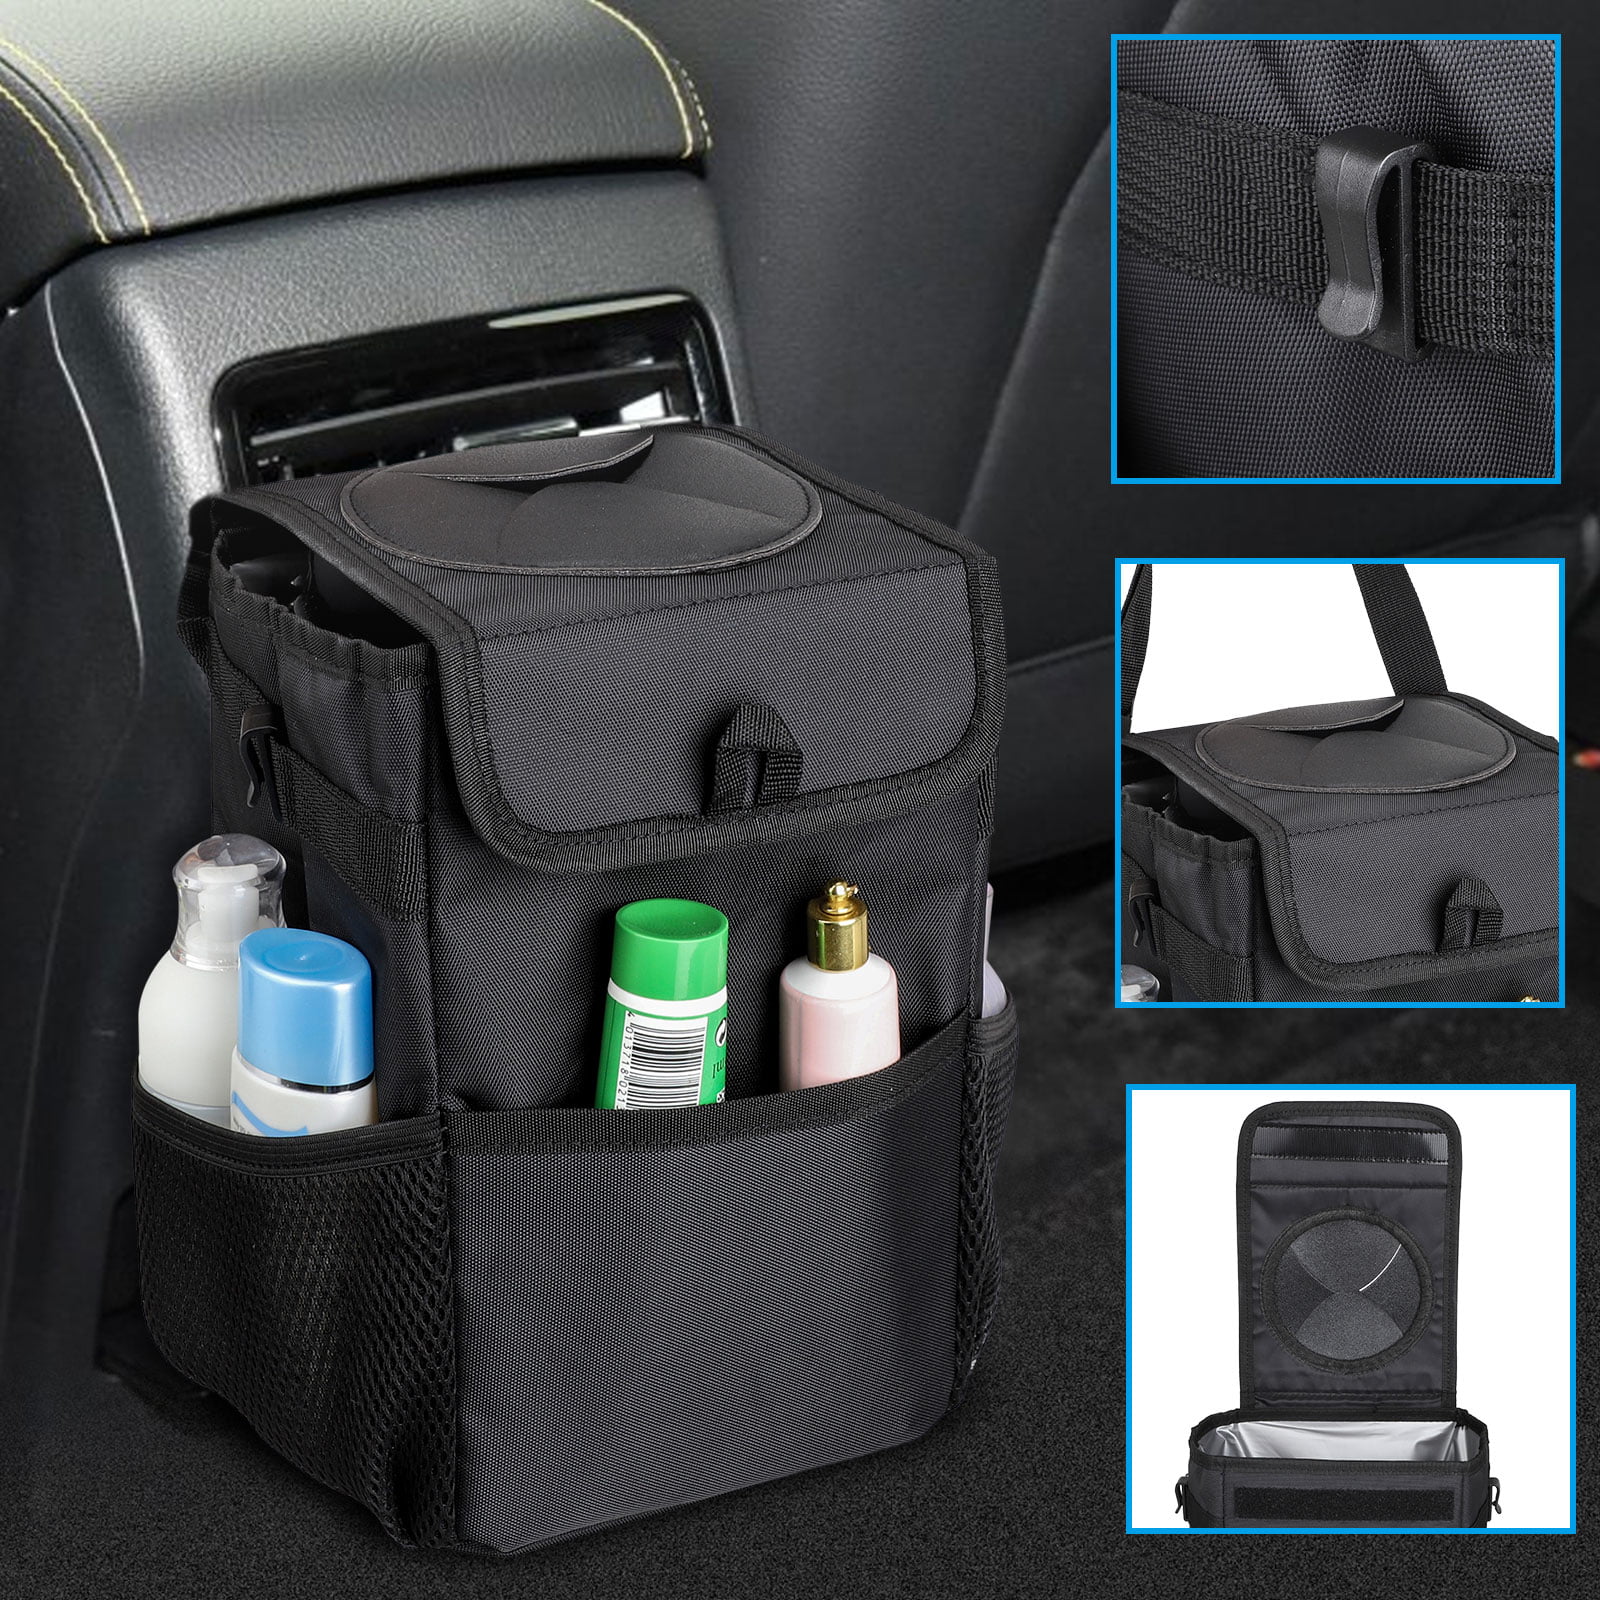 Car Trash Can Leak Proof Car Trash Bin Waterproof Car Garbage Can with Lid for SUV Front Seat Multipurpose Car Hanging Bag for Headrest Collapsible and Portable with Storage Mesh Pocket Black 